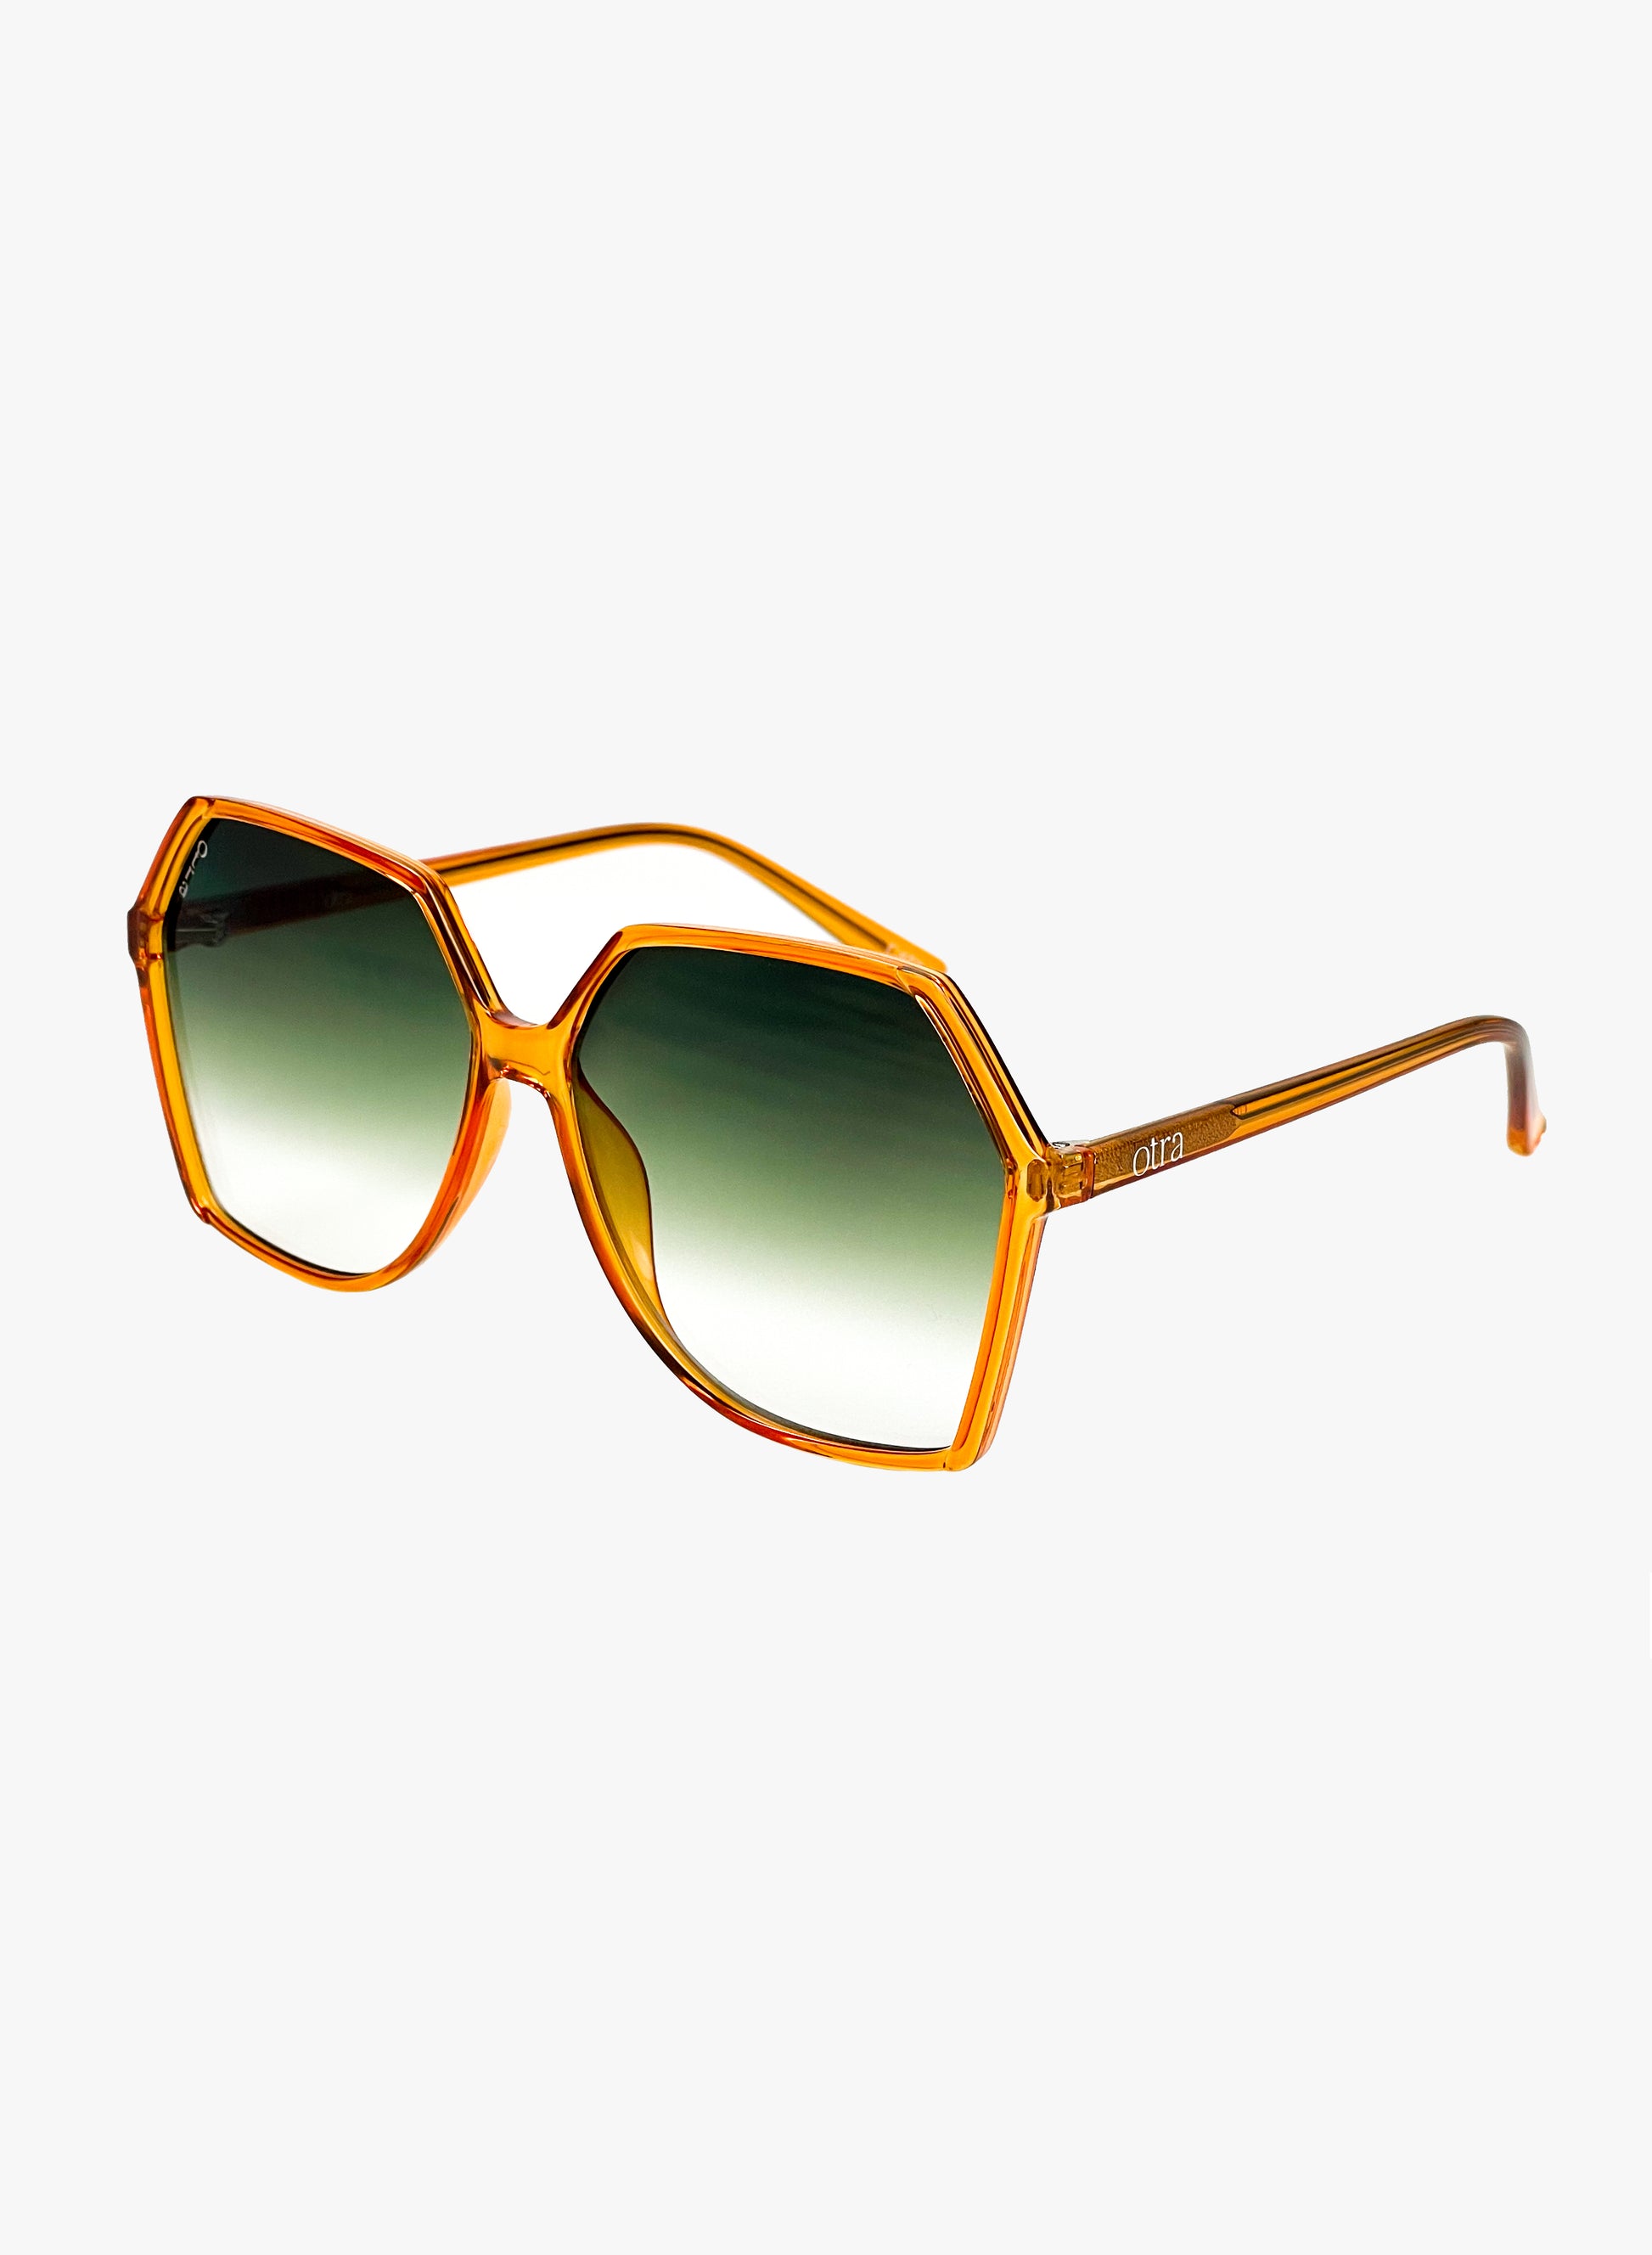 Side view of Virgo oversied mod sunglasses in gold and green